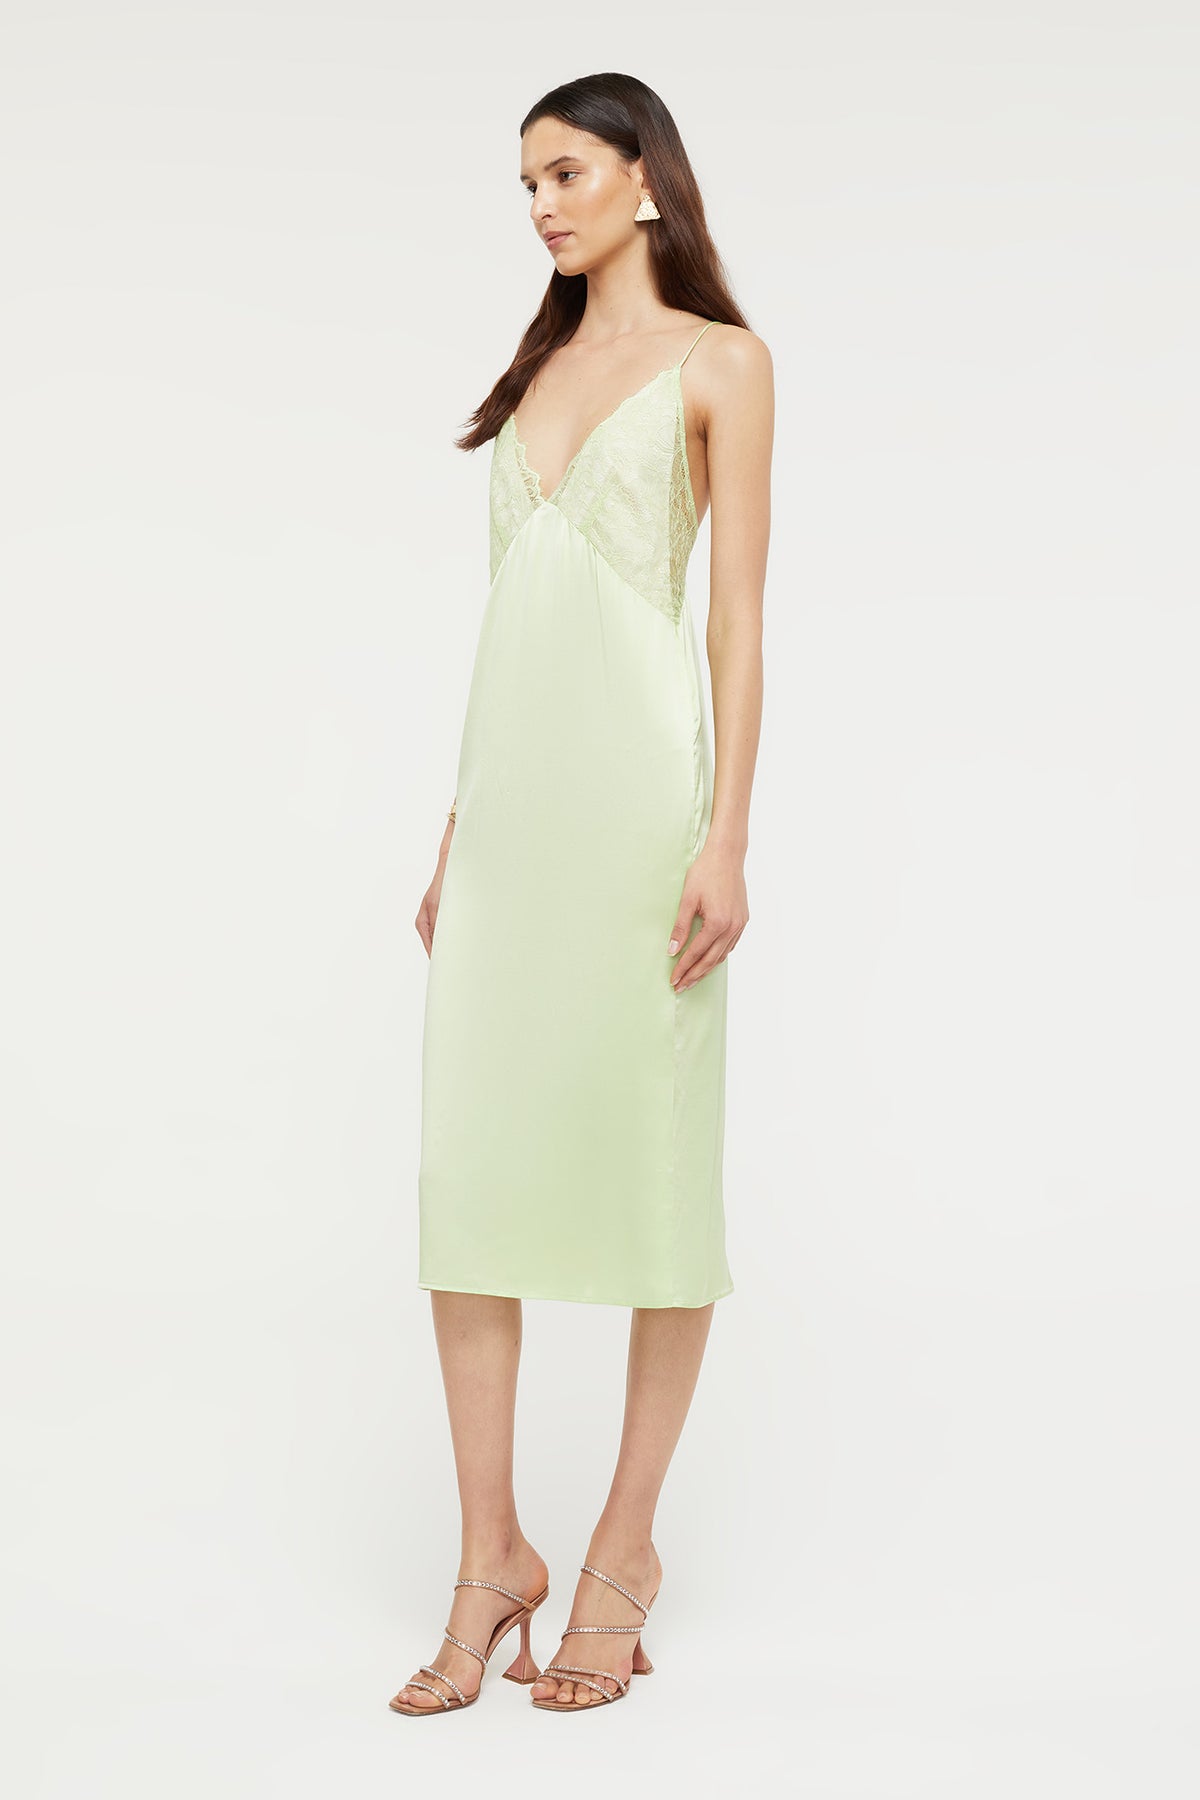 GINIA Desire Dress in Pure Lime 19 Momme Silk